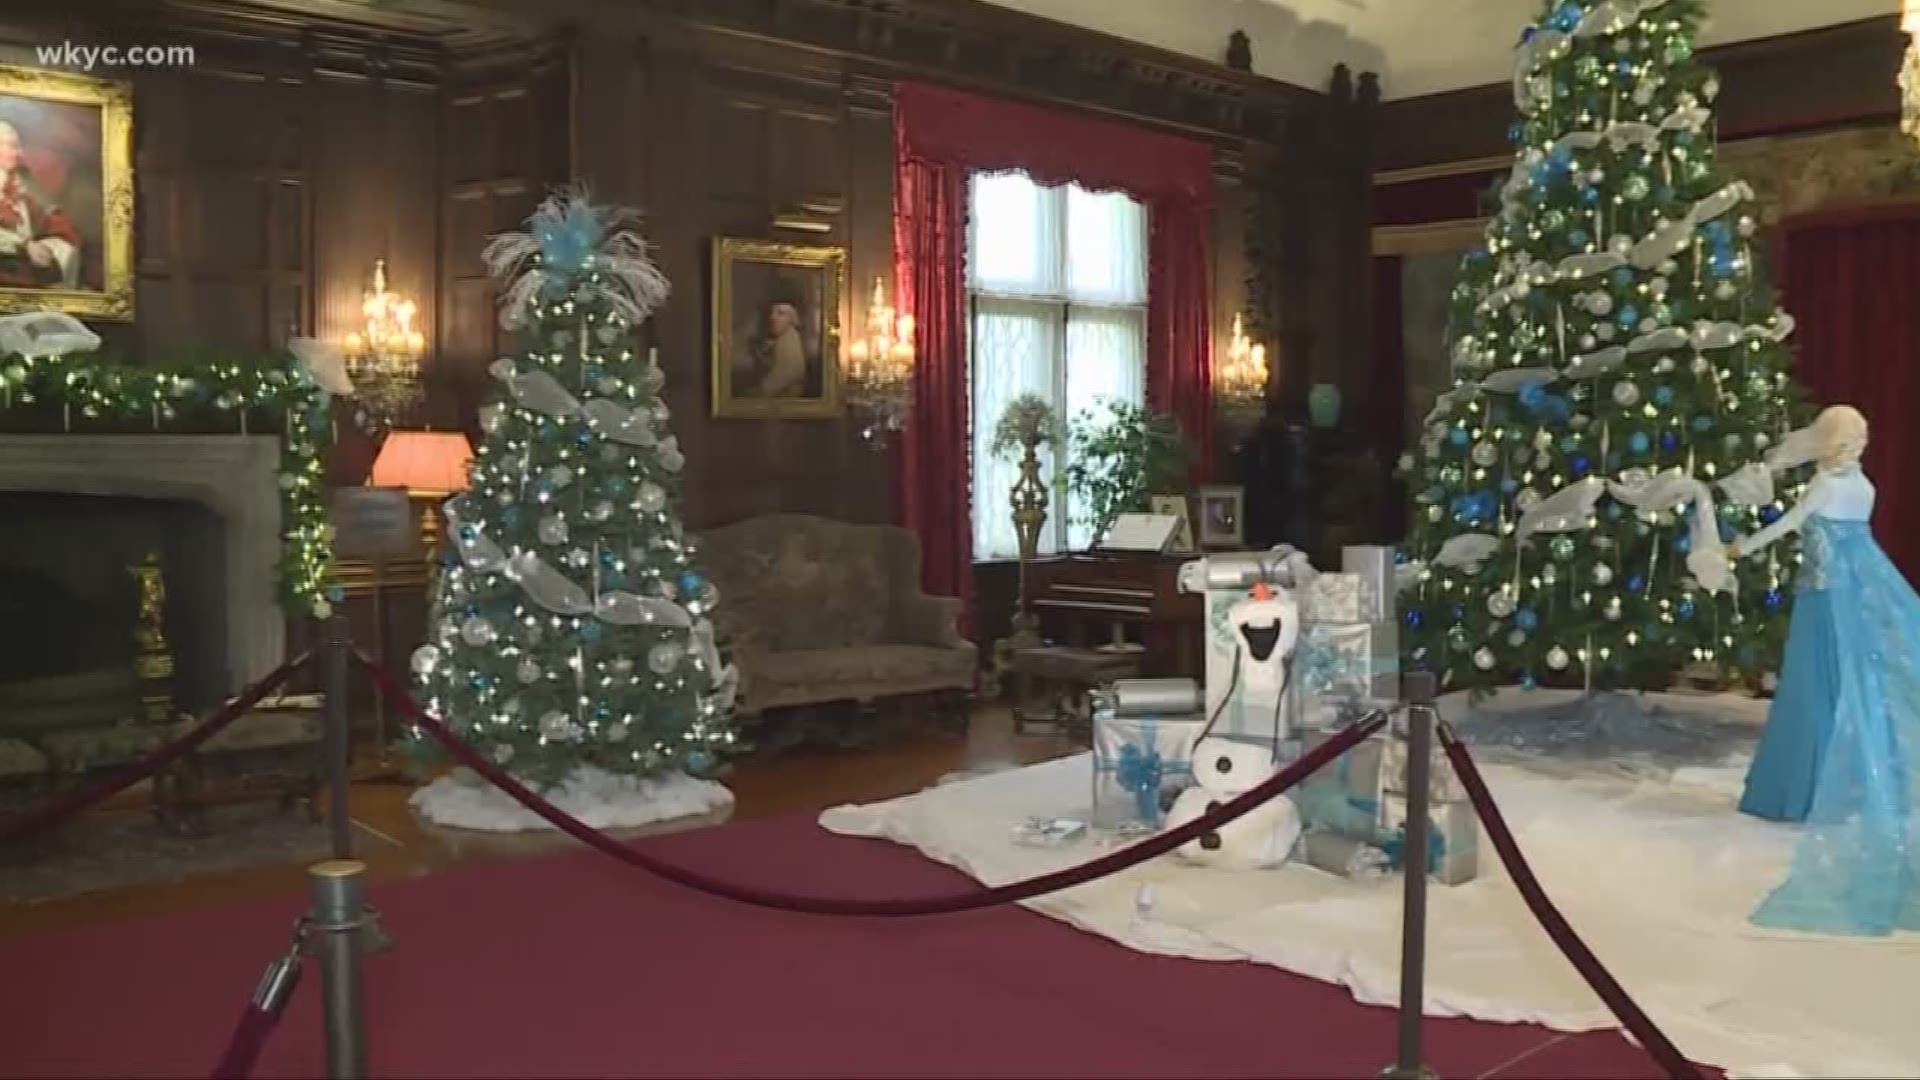 Stan Hywet's 'Deck the Hall' holiday display is in the national spotlight